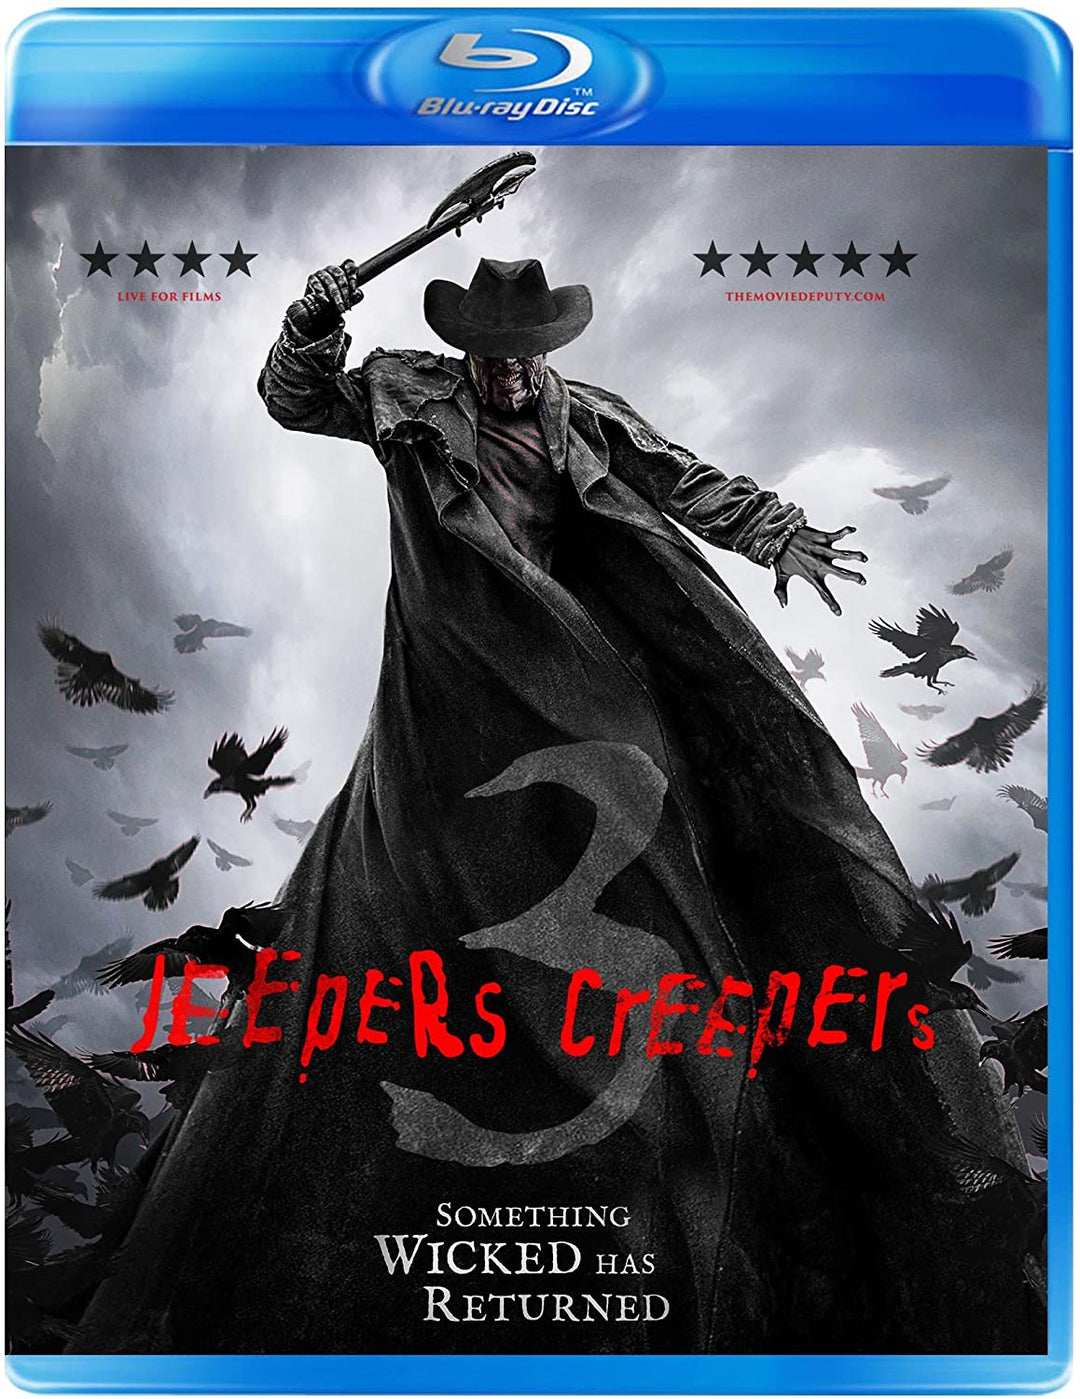 Jeepers Creepers 3 – Horror/Thriller [Blu-ray]